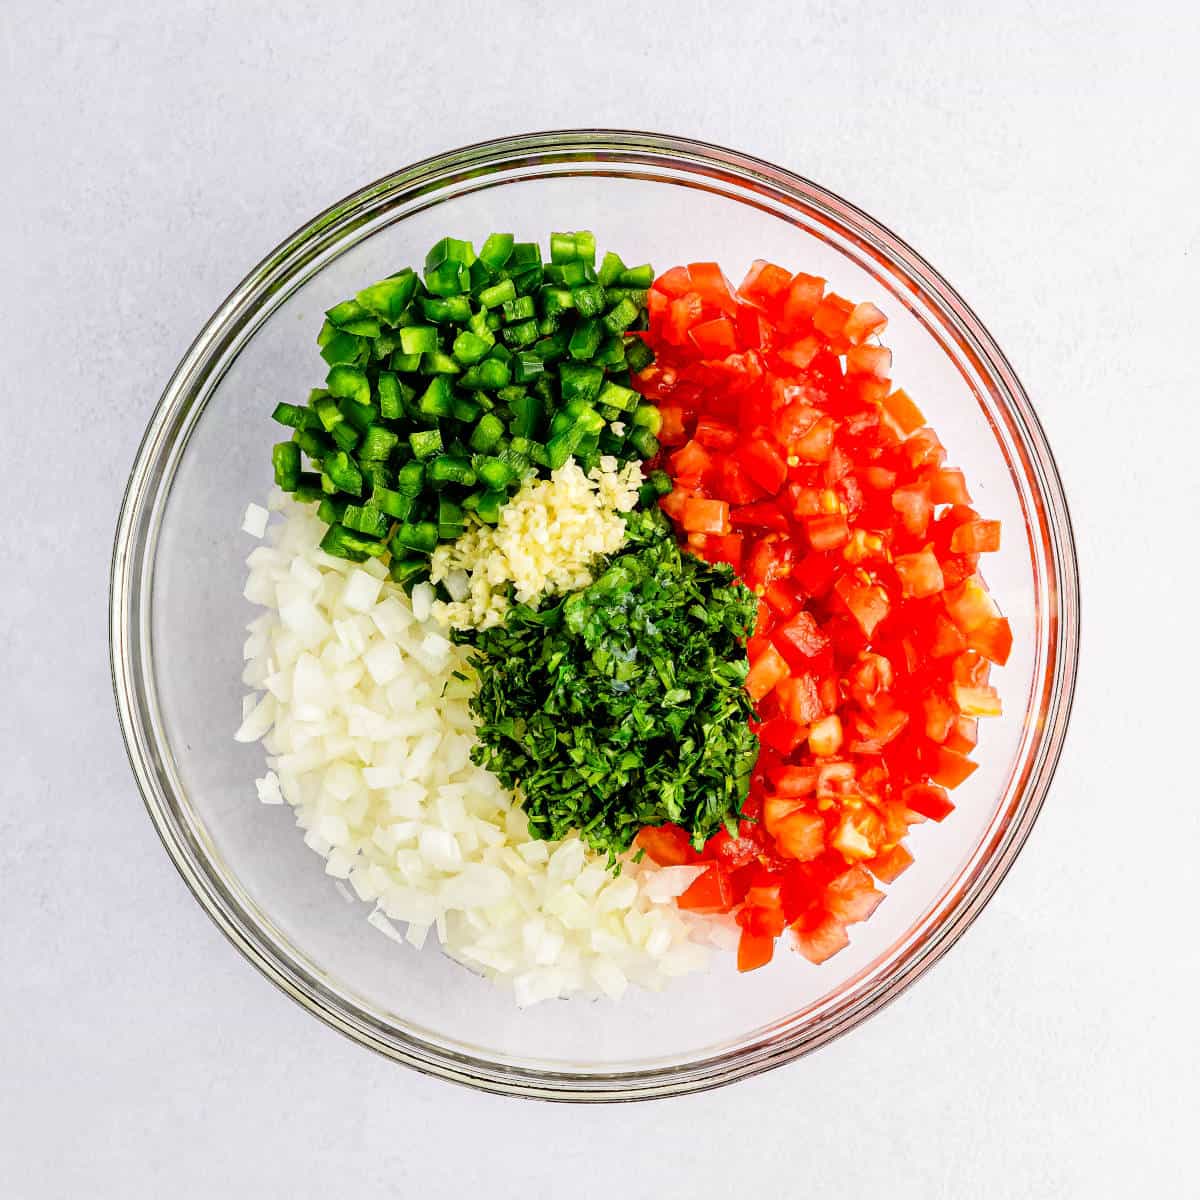 Pico de Gallo ingredients added to a medium glass mixing bowl.